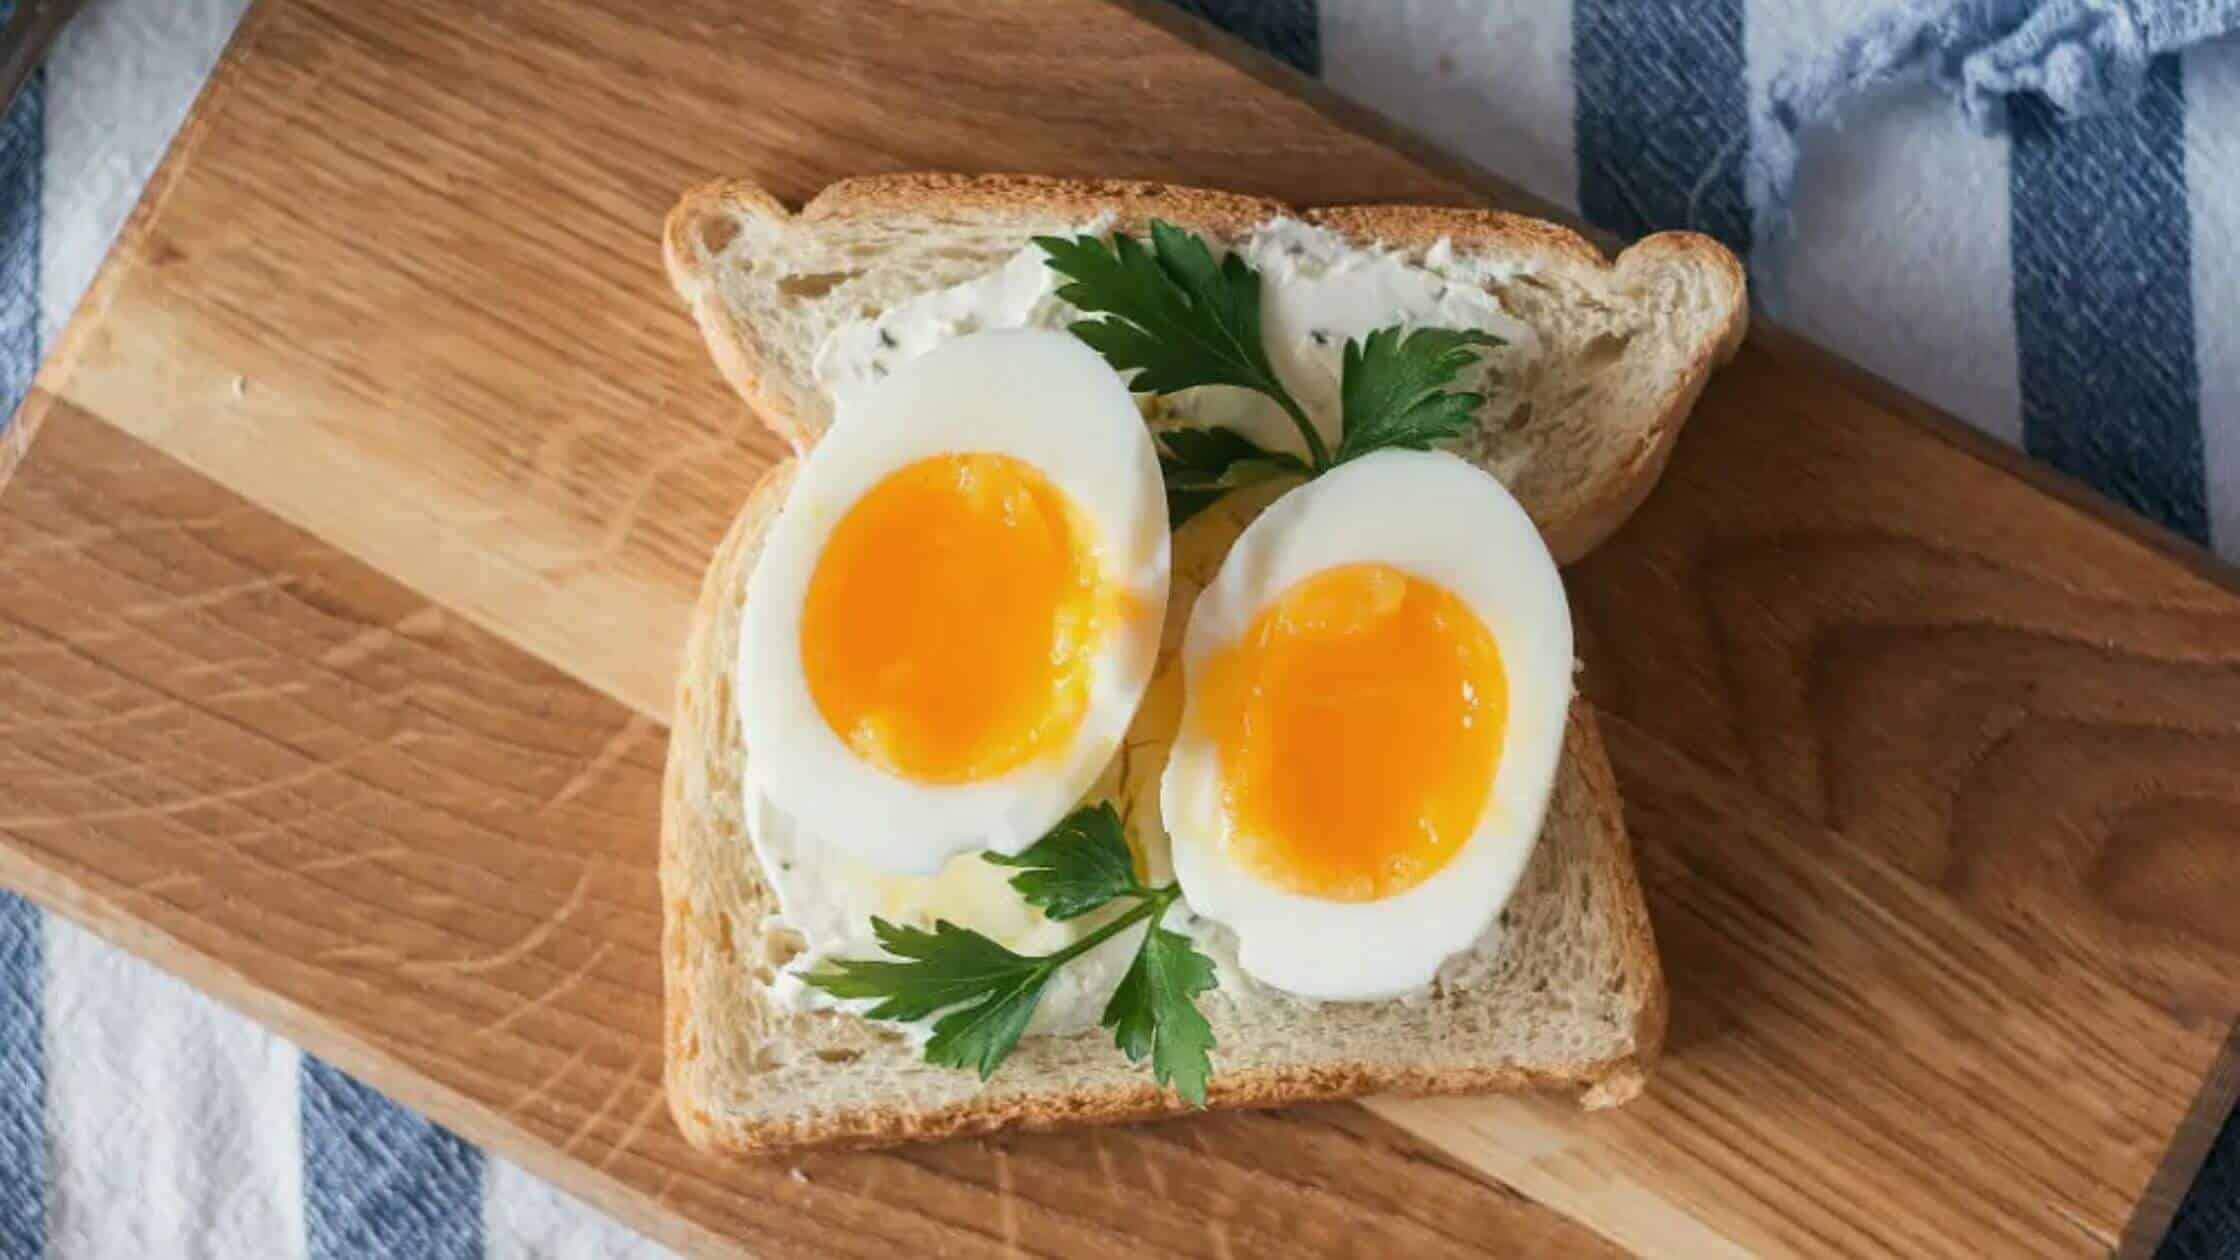 Is Eggs Good For Cholesterol?